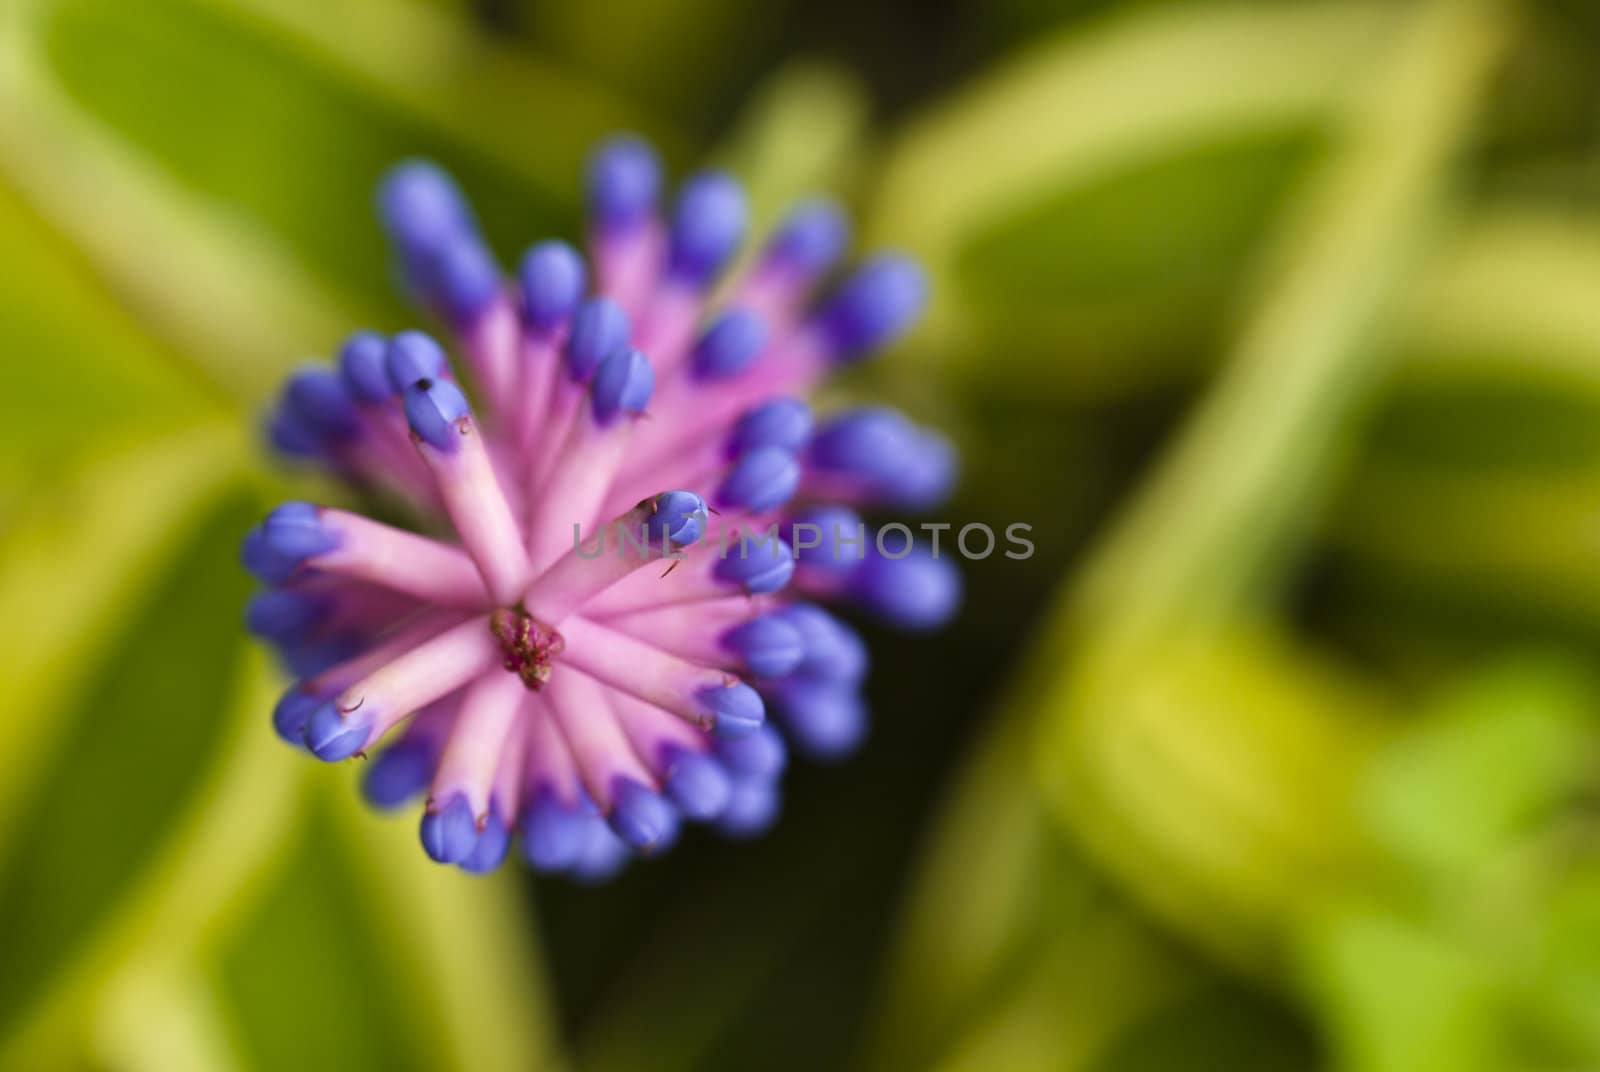 Purple match-like flower petals with blurry background